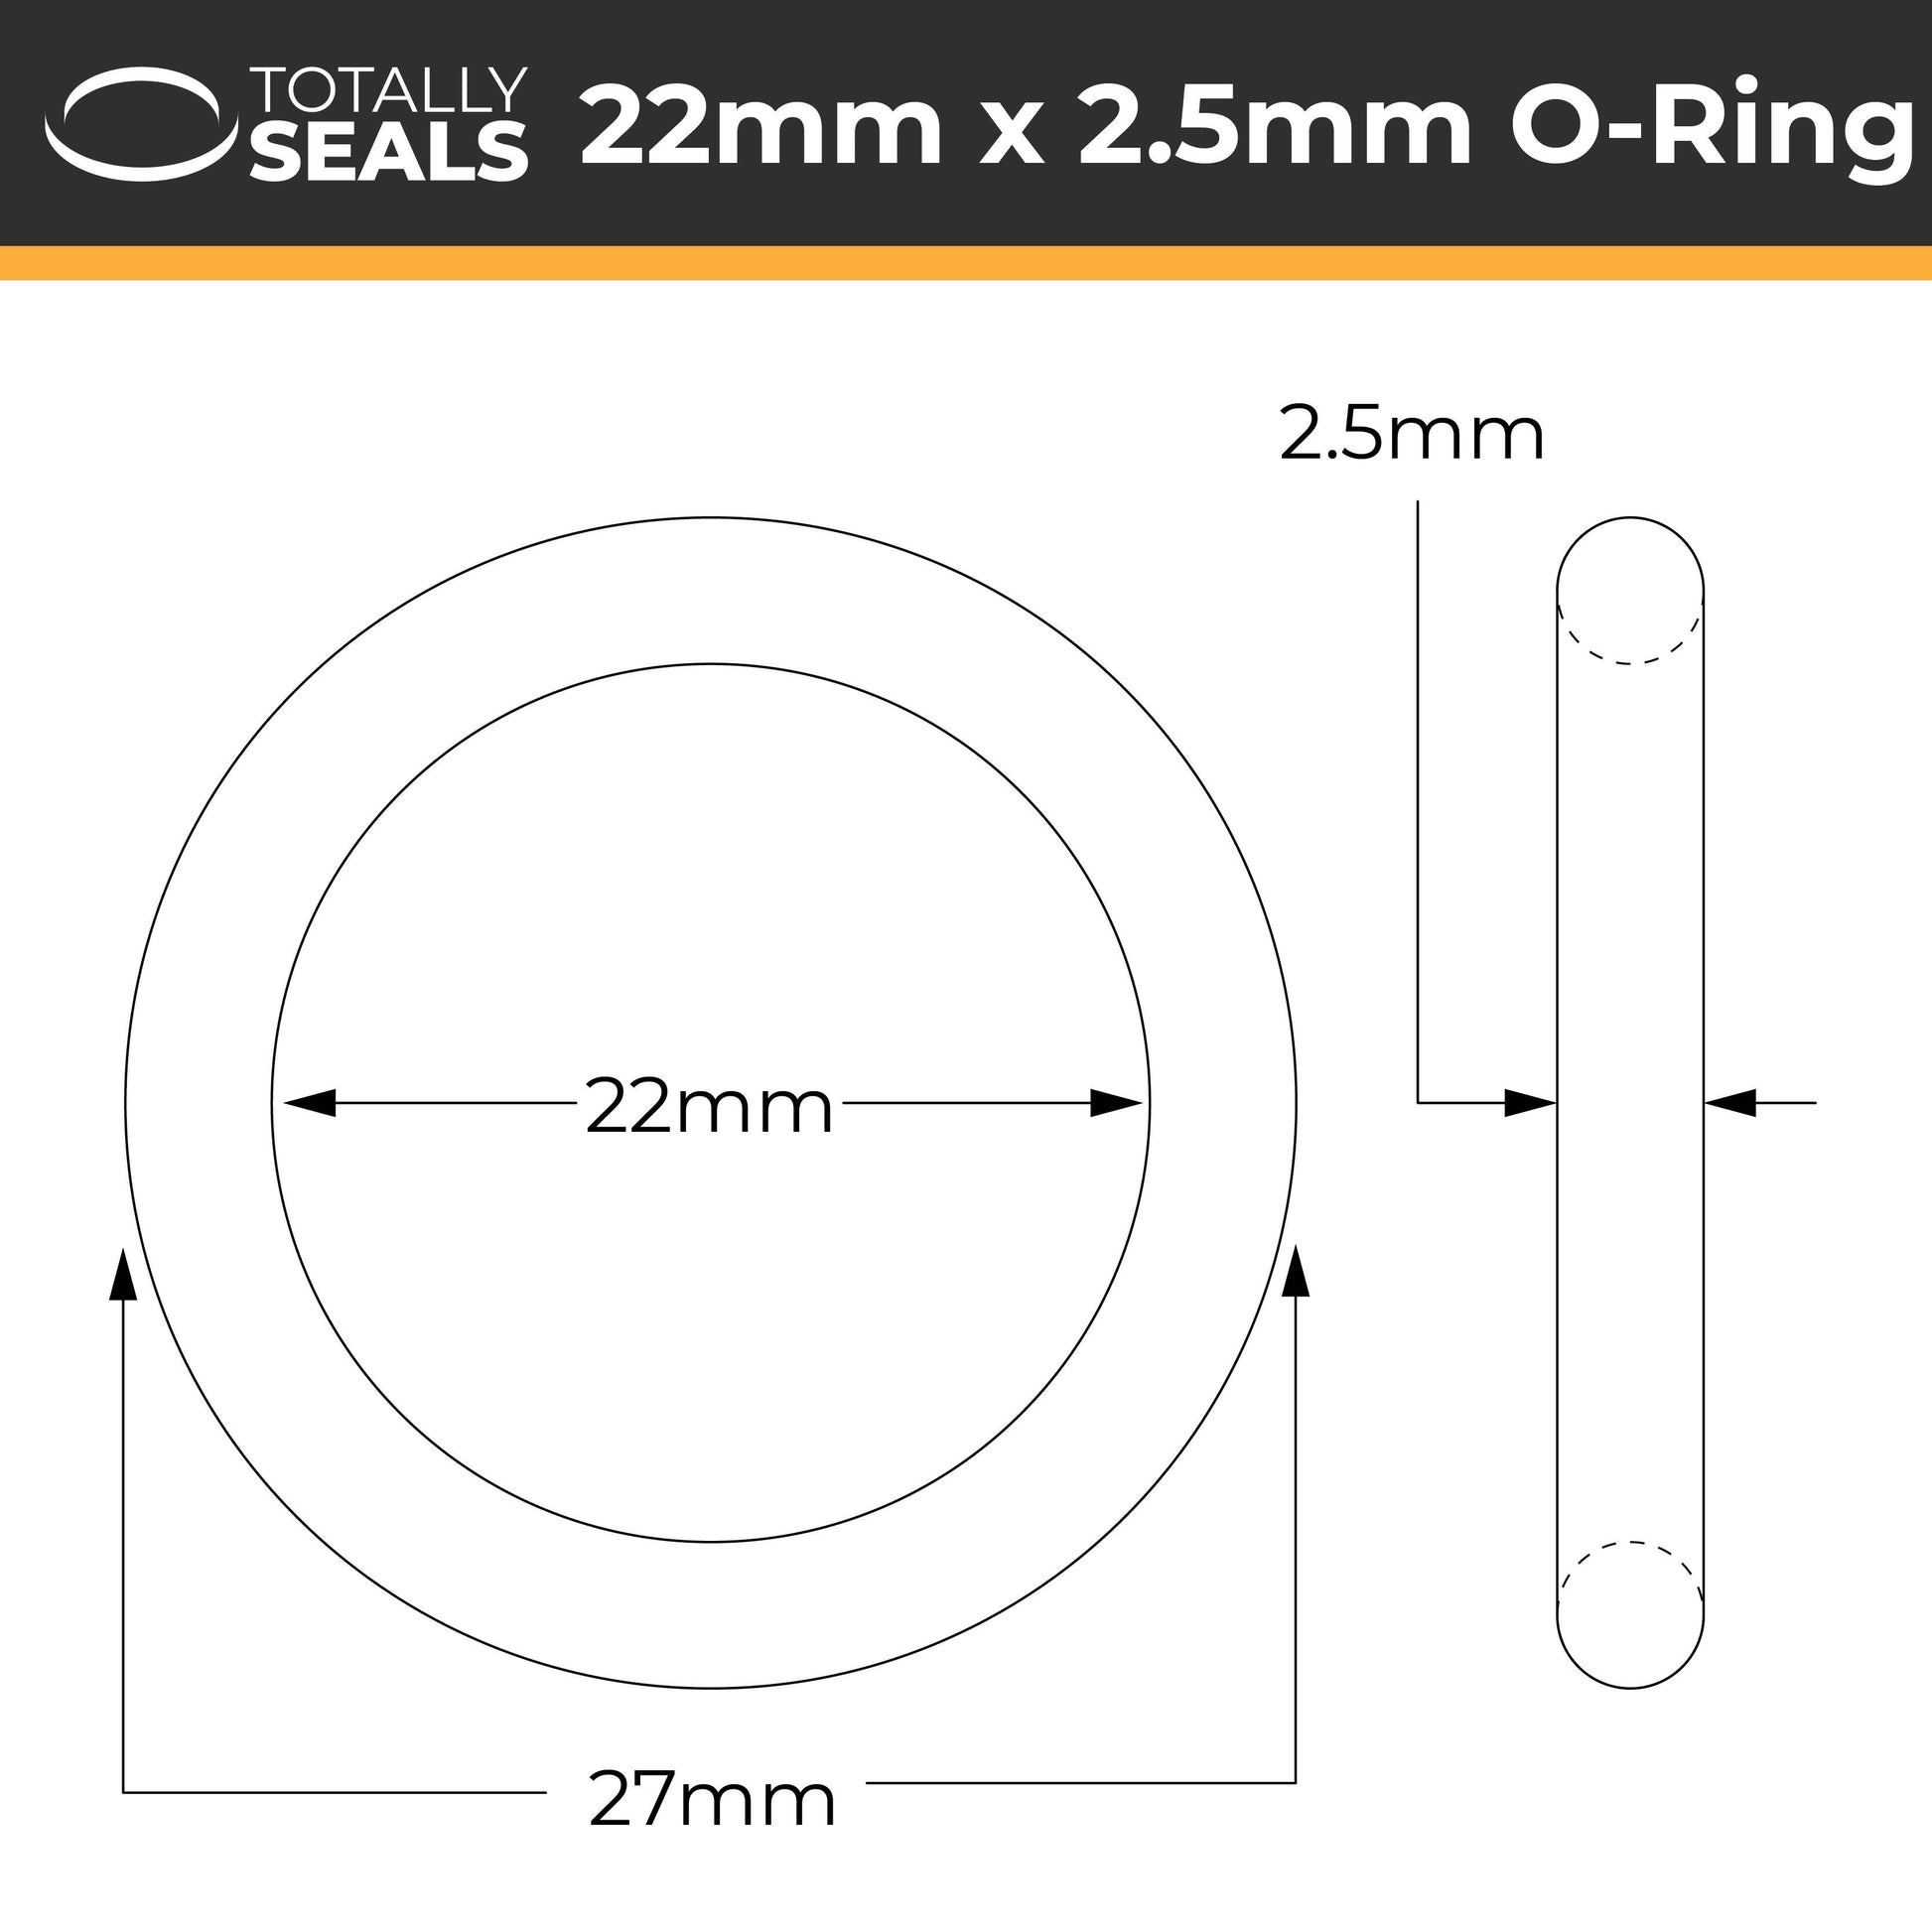 22mm x 2.5mm (27mm OD) Nitrile O-Rings - Totally Seals®